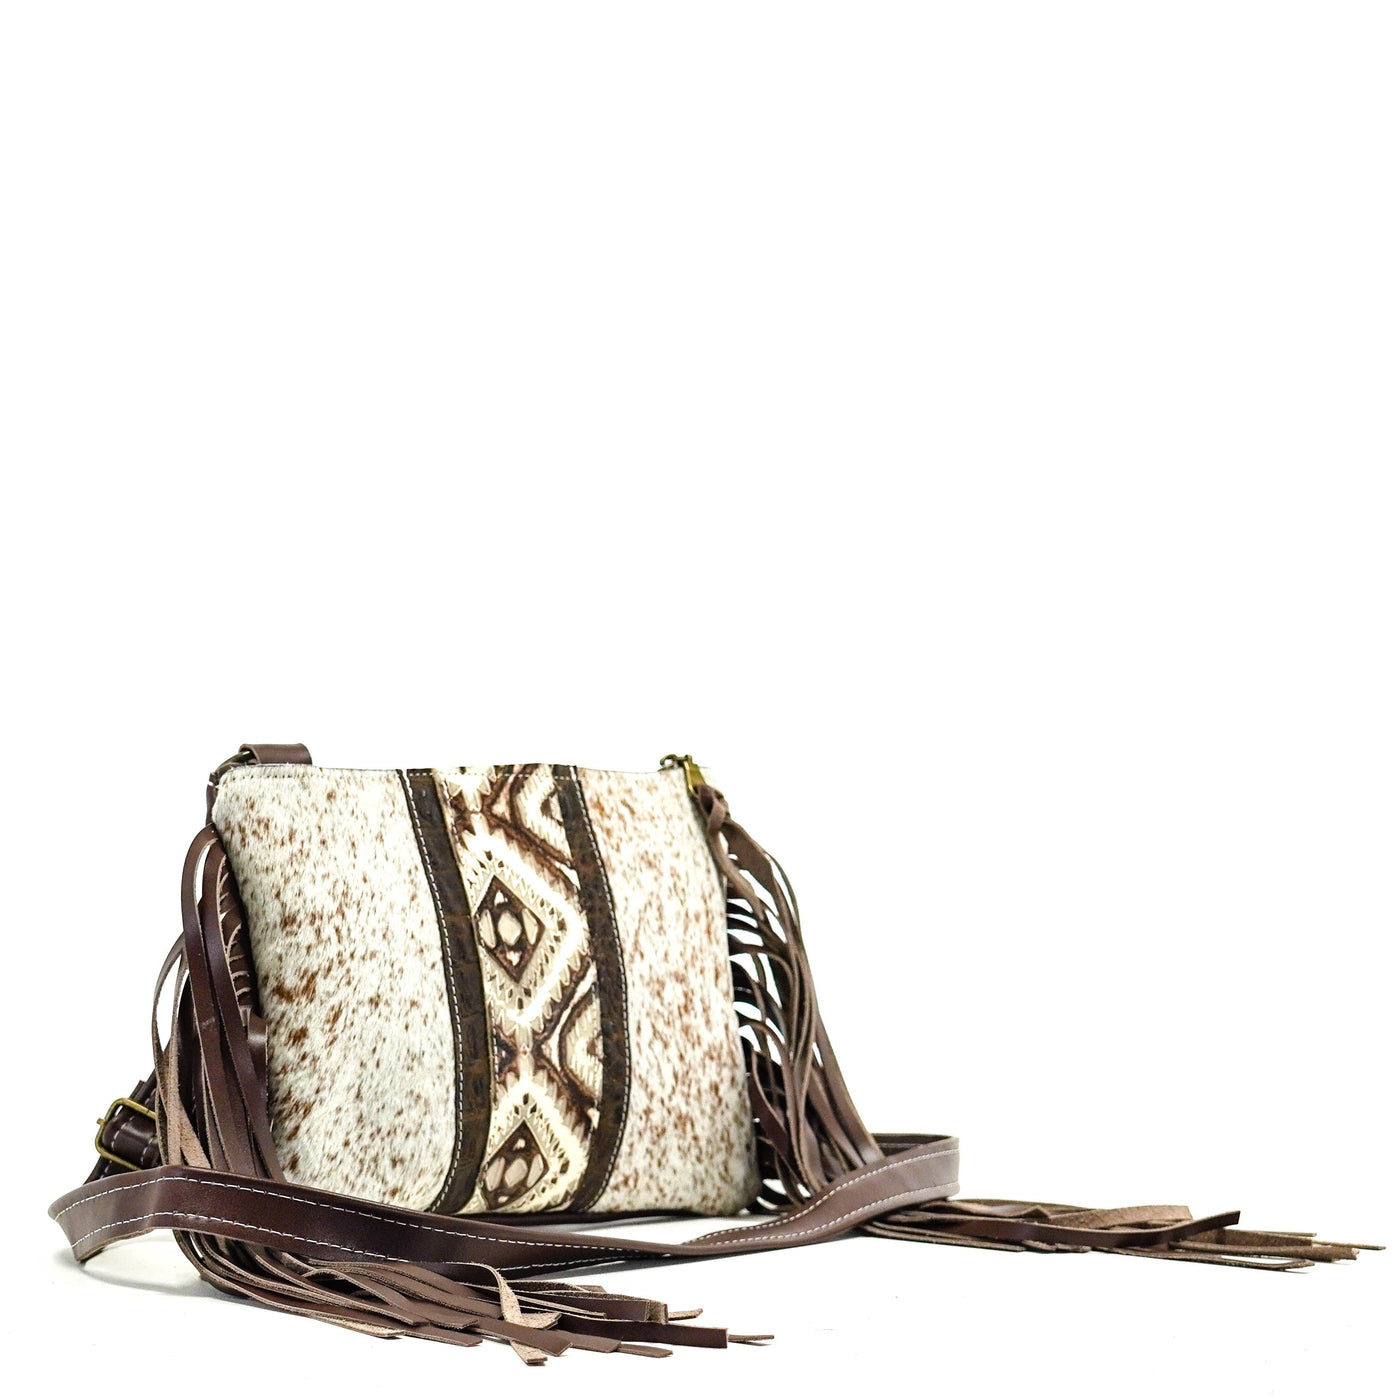 Patsy - Speckled Longhorn w/ Ivory & Bronze Aztec-Patsy-Western-Cowhide-Bags-Handmade-Products-Gifts-Dancing Cactus Designs